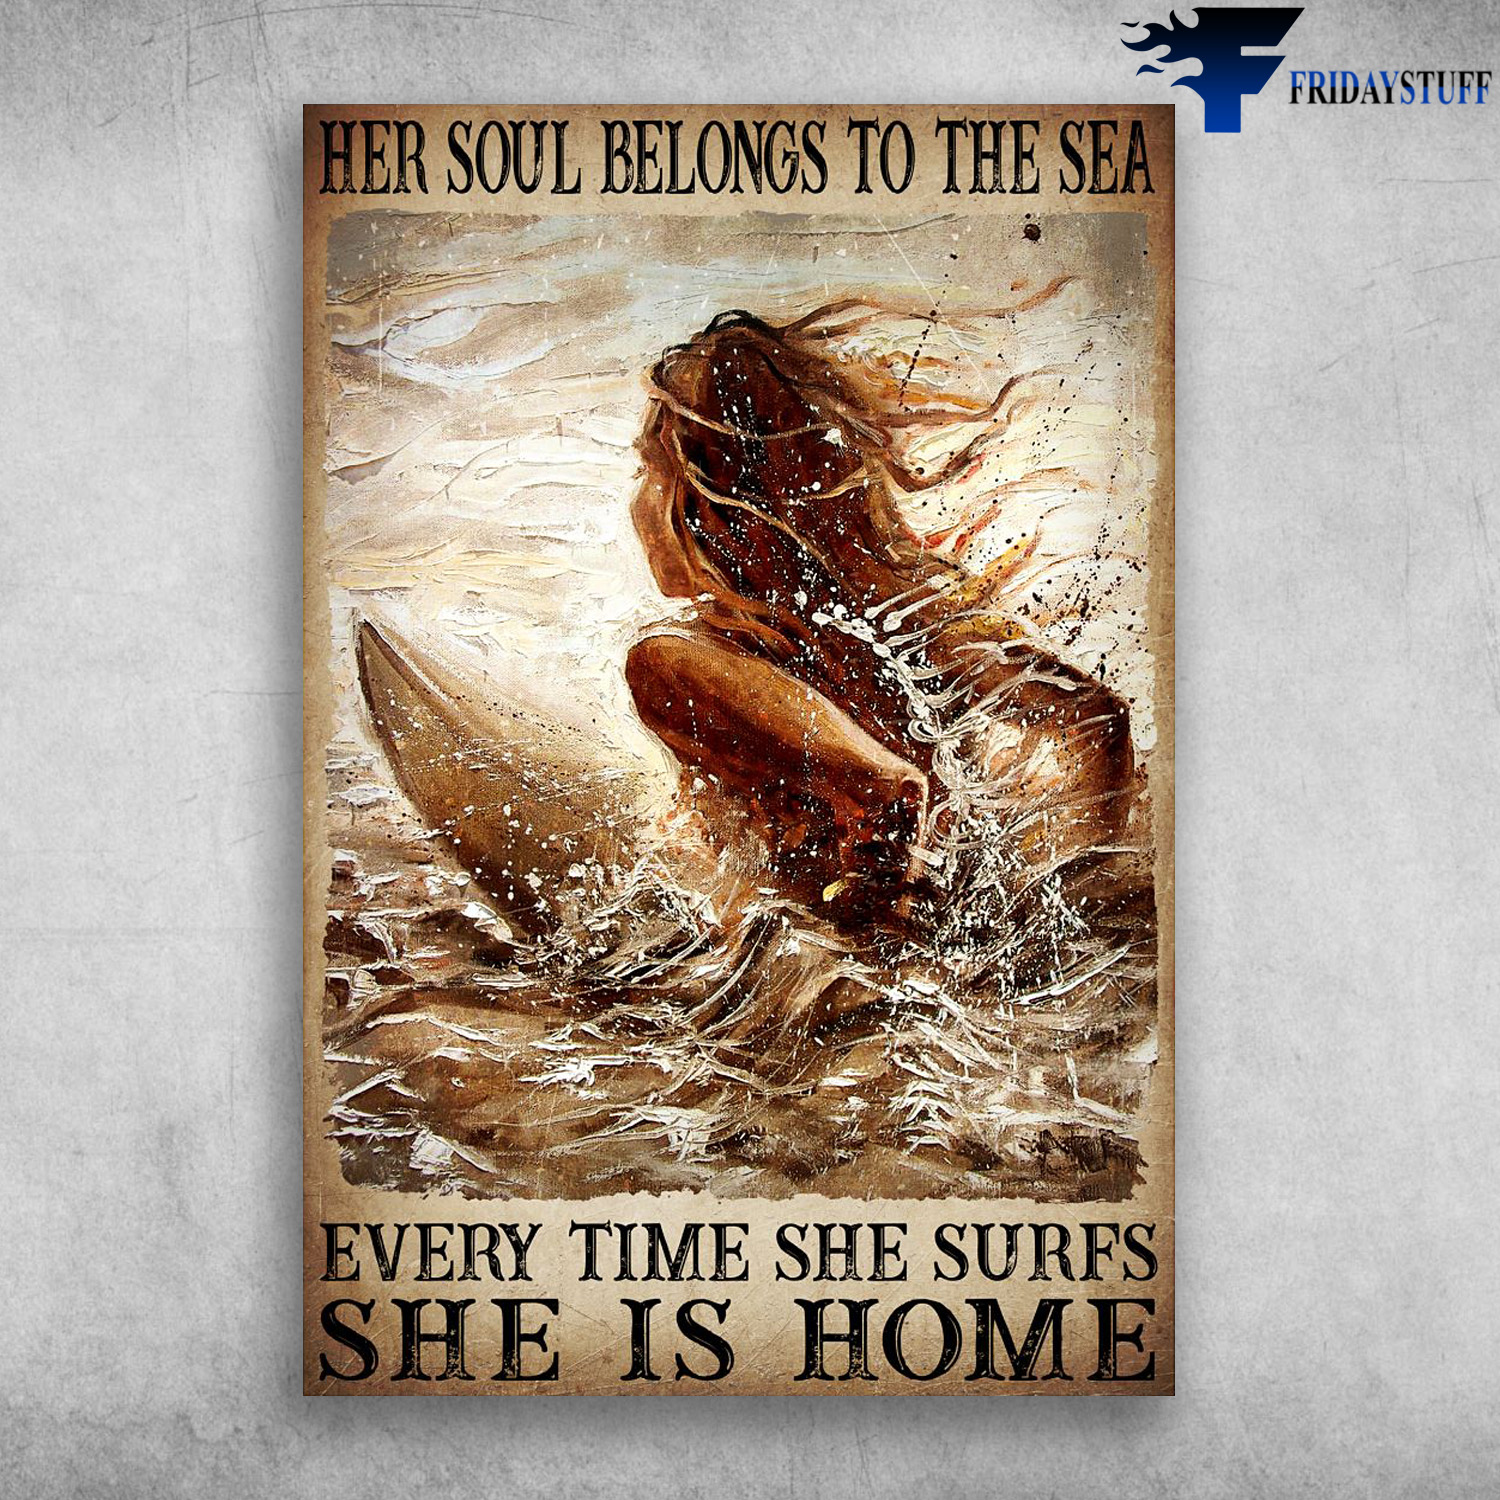 Girl Surfing On The Sea - Her Soul Belongs To The Sea, Every Time She Surfs, She Is Home